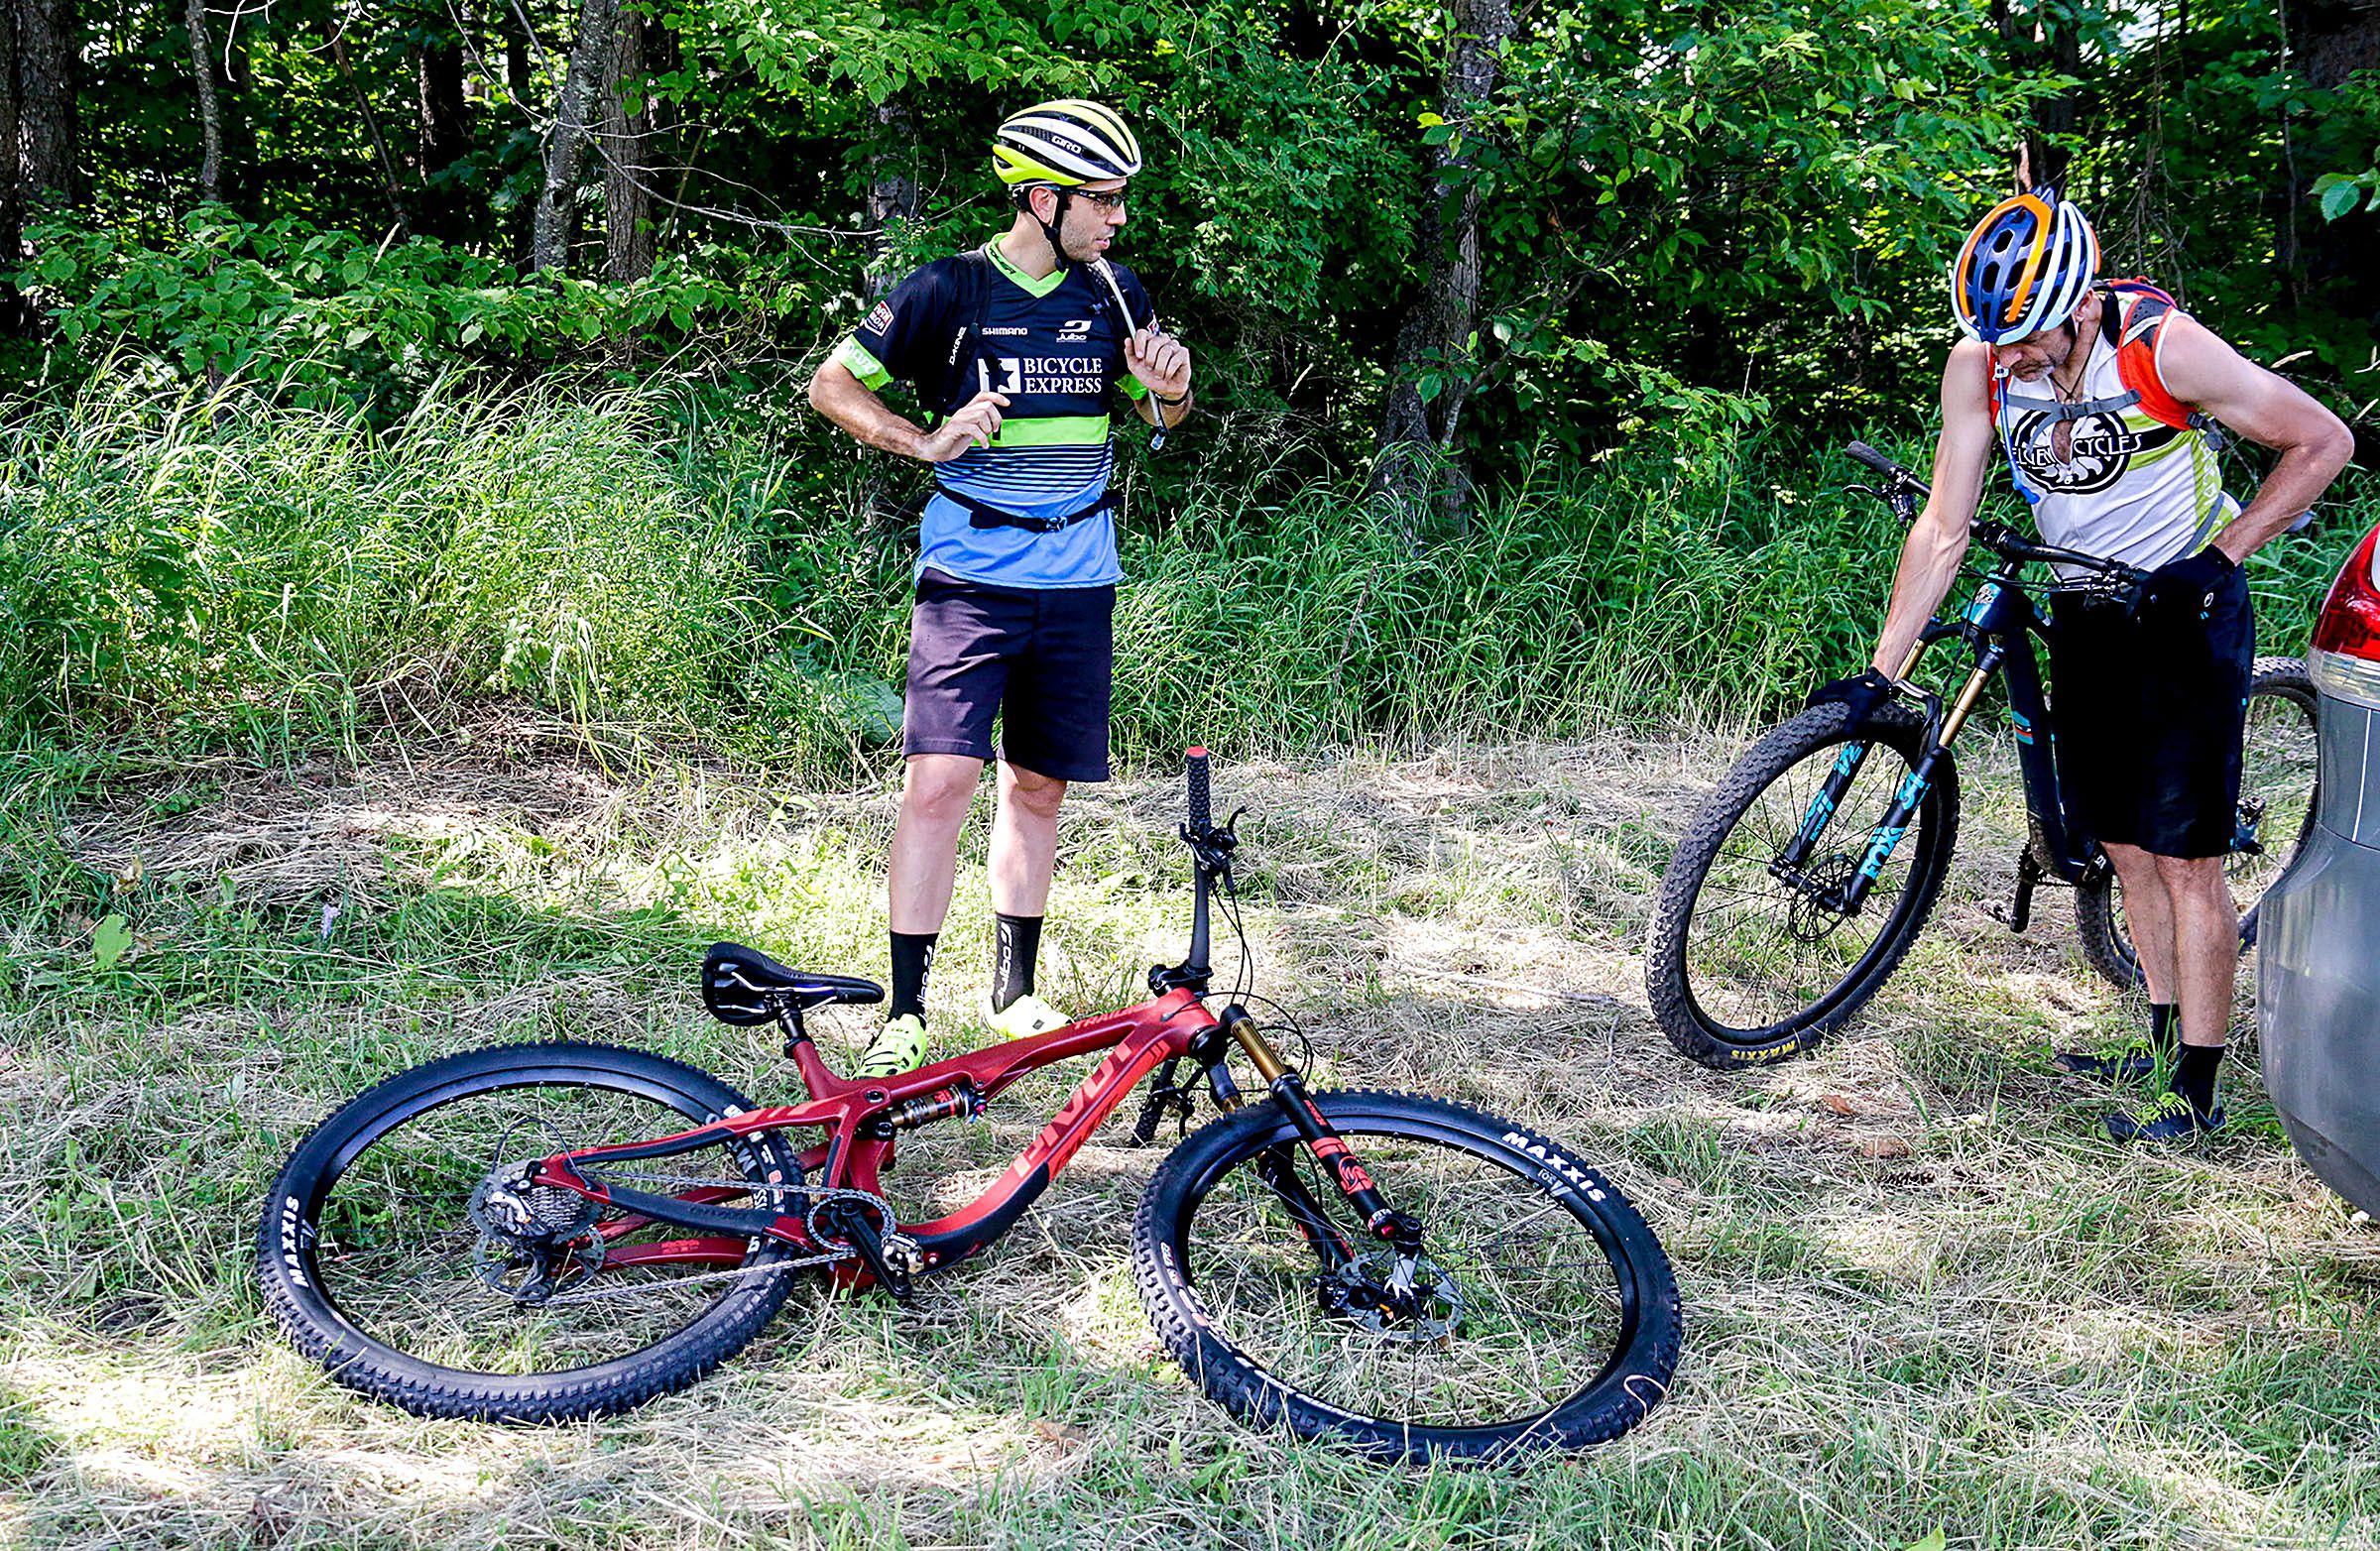 David Crothers, of Waterbury, Vt., and Tyler Merritt, of Richmond, Vt., get ready for a mountain bike ride up Ascutney Mountain from the Base Lodge, in Brownsville, Vt., on Monday, July 2, 2018. (Valley News - August Frank) Copyright Valley News. May not be reprinted or used online without permission. Send requests to permission@vnews.com.